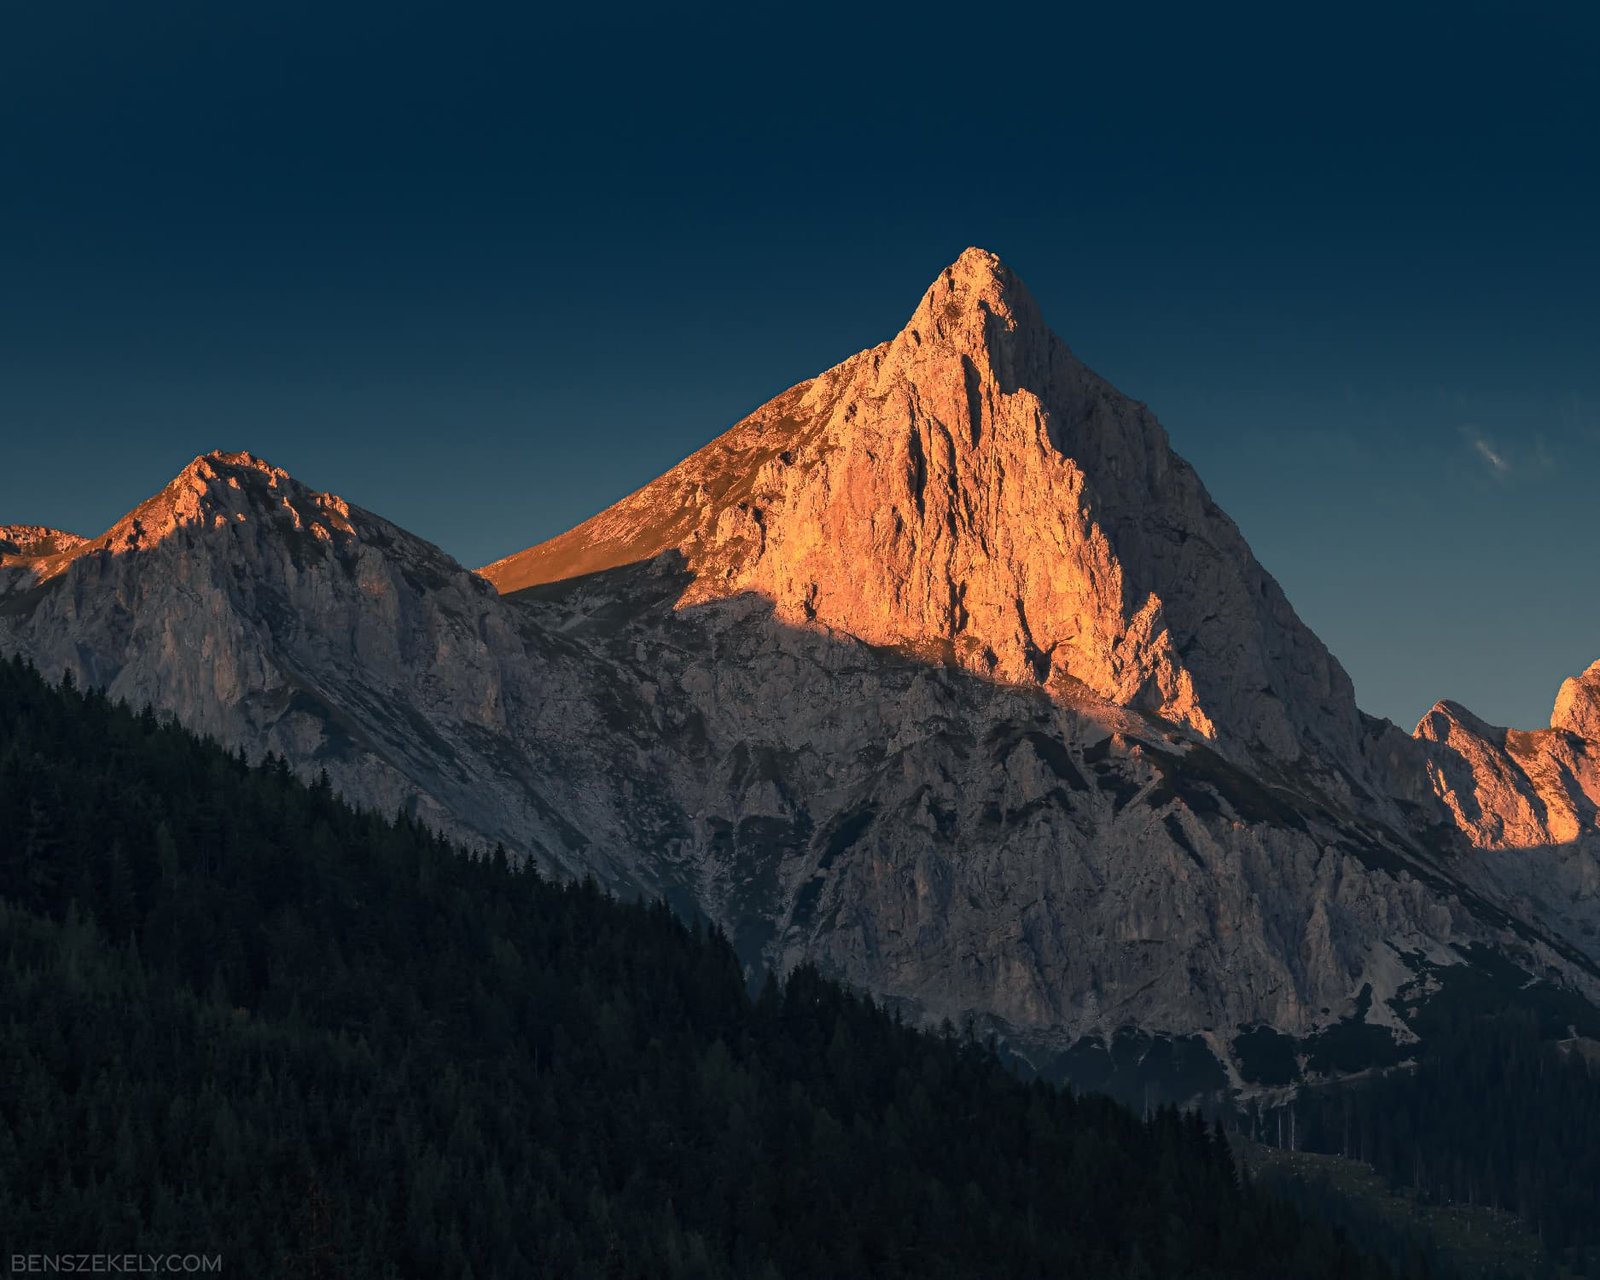 Nature photograph of a mountain during a beautiful sunset.